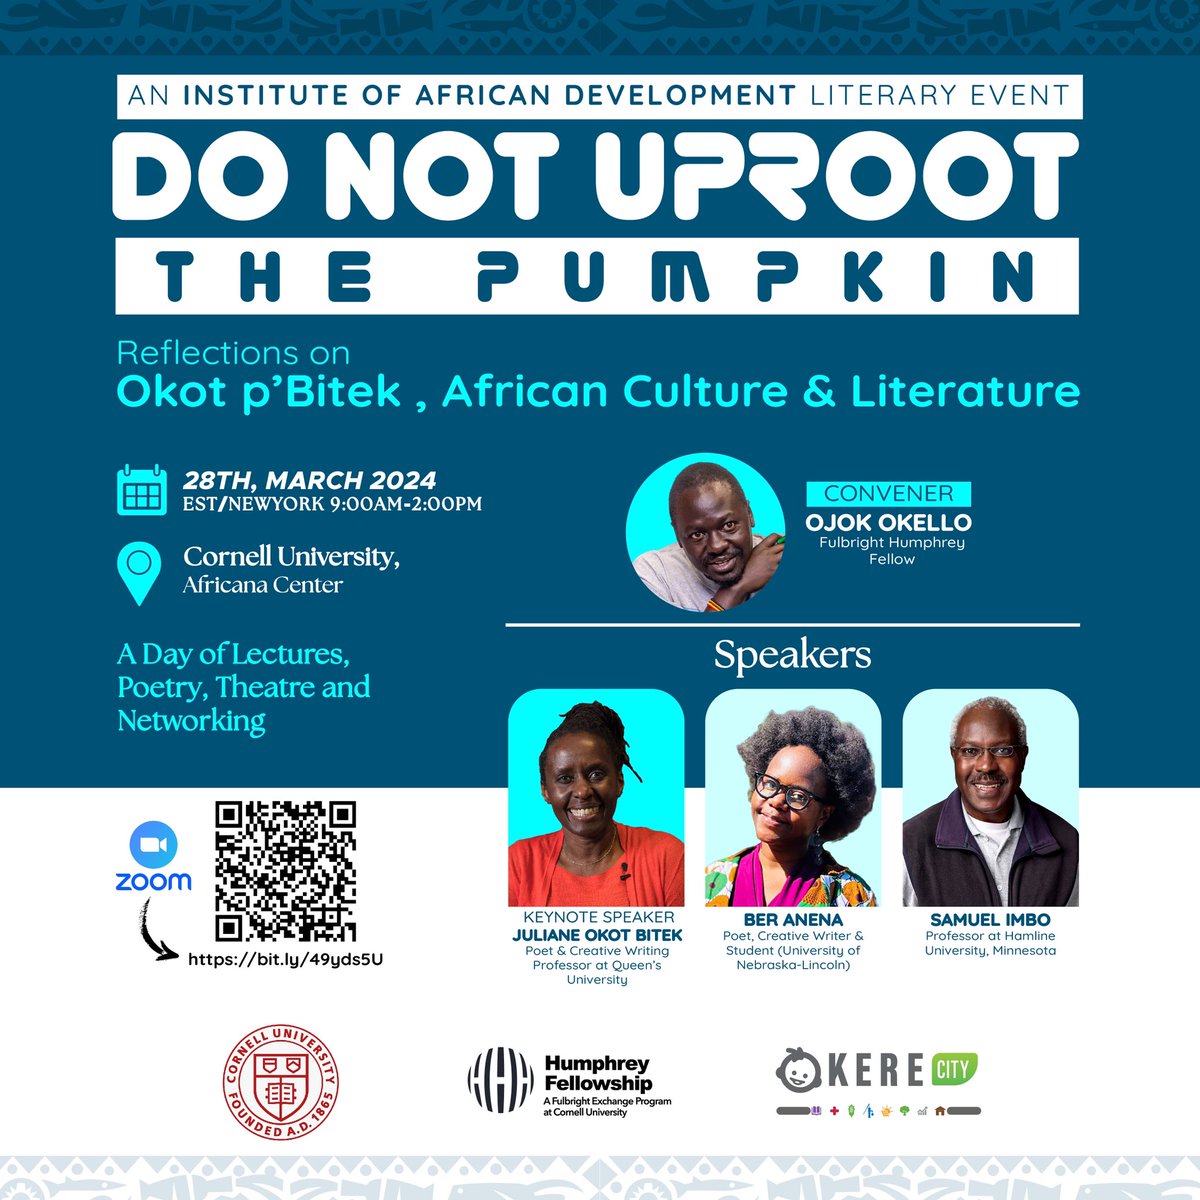 l’ll be presenting a paper “Rereading Okot p’Bitek in Contemporary Uganda” at Cornell University on March 28th. Bitek was one of my early influences to becoming a writer. Excited to see @jobitek again and all the great speakers. Thank you @OjokOkello_ Join us in person or online.